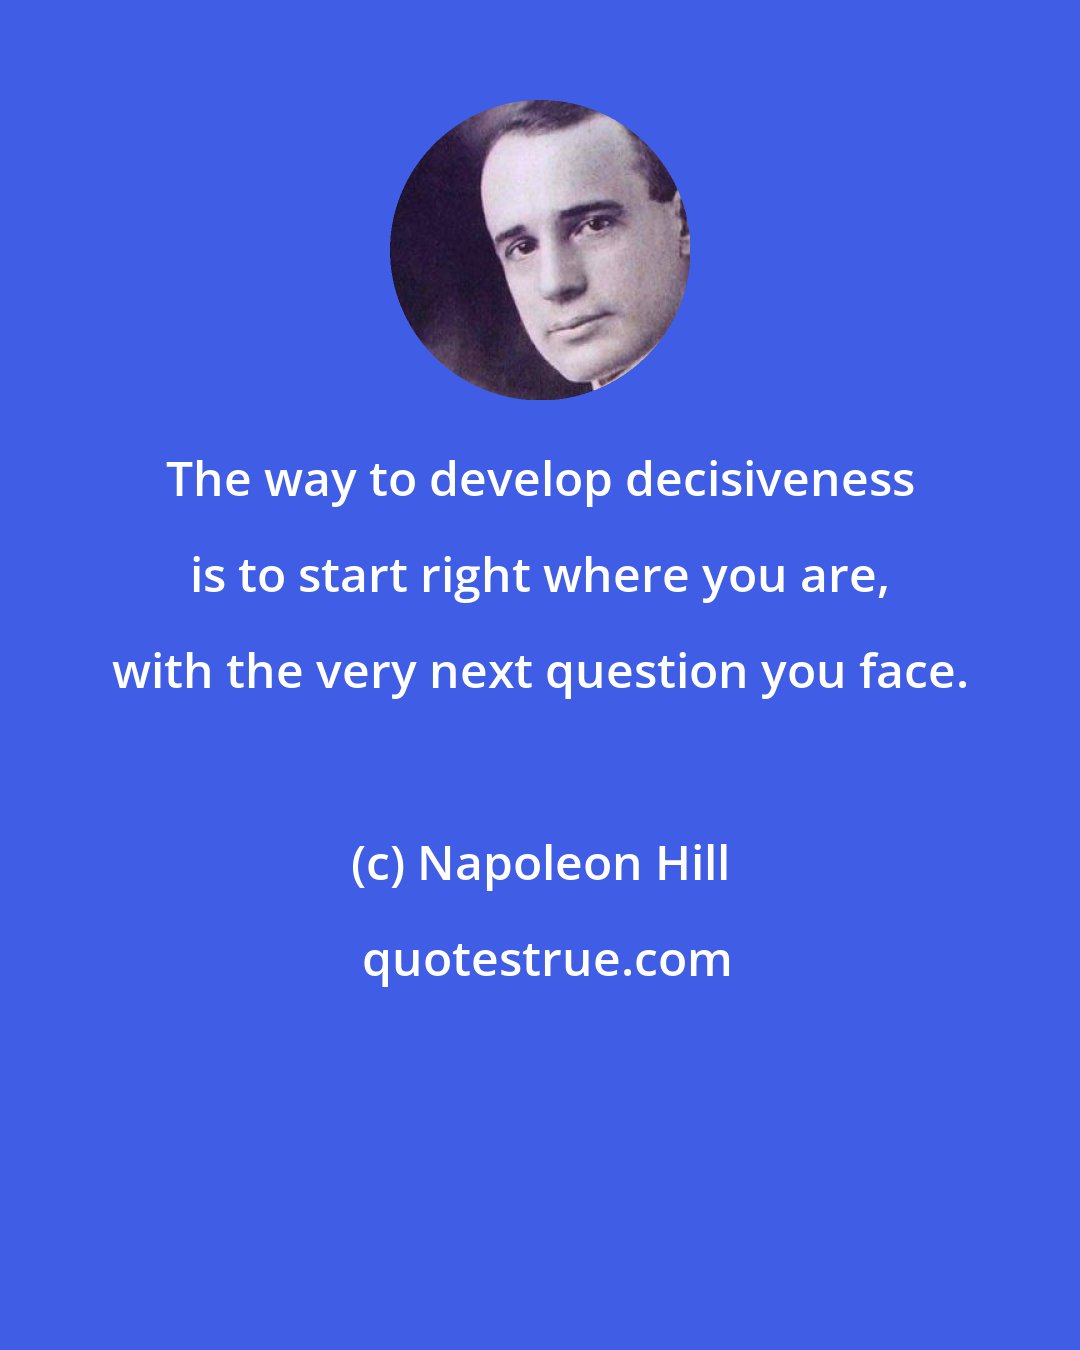 Napoleon Hill: The way to develop decisiveness is to start right where you are, with the very next question you face.